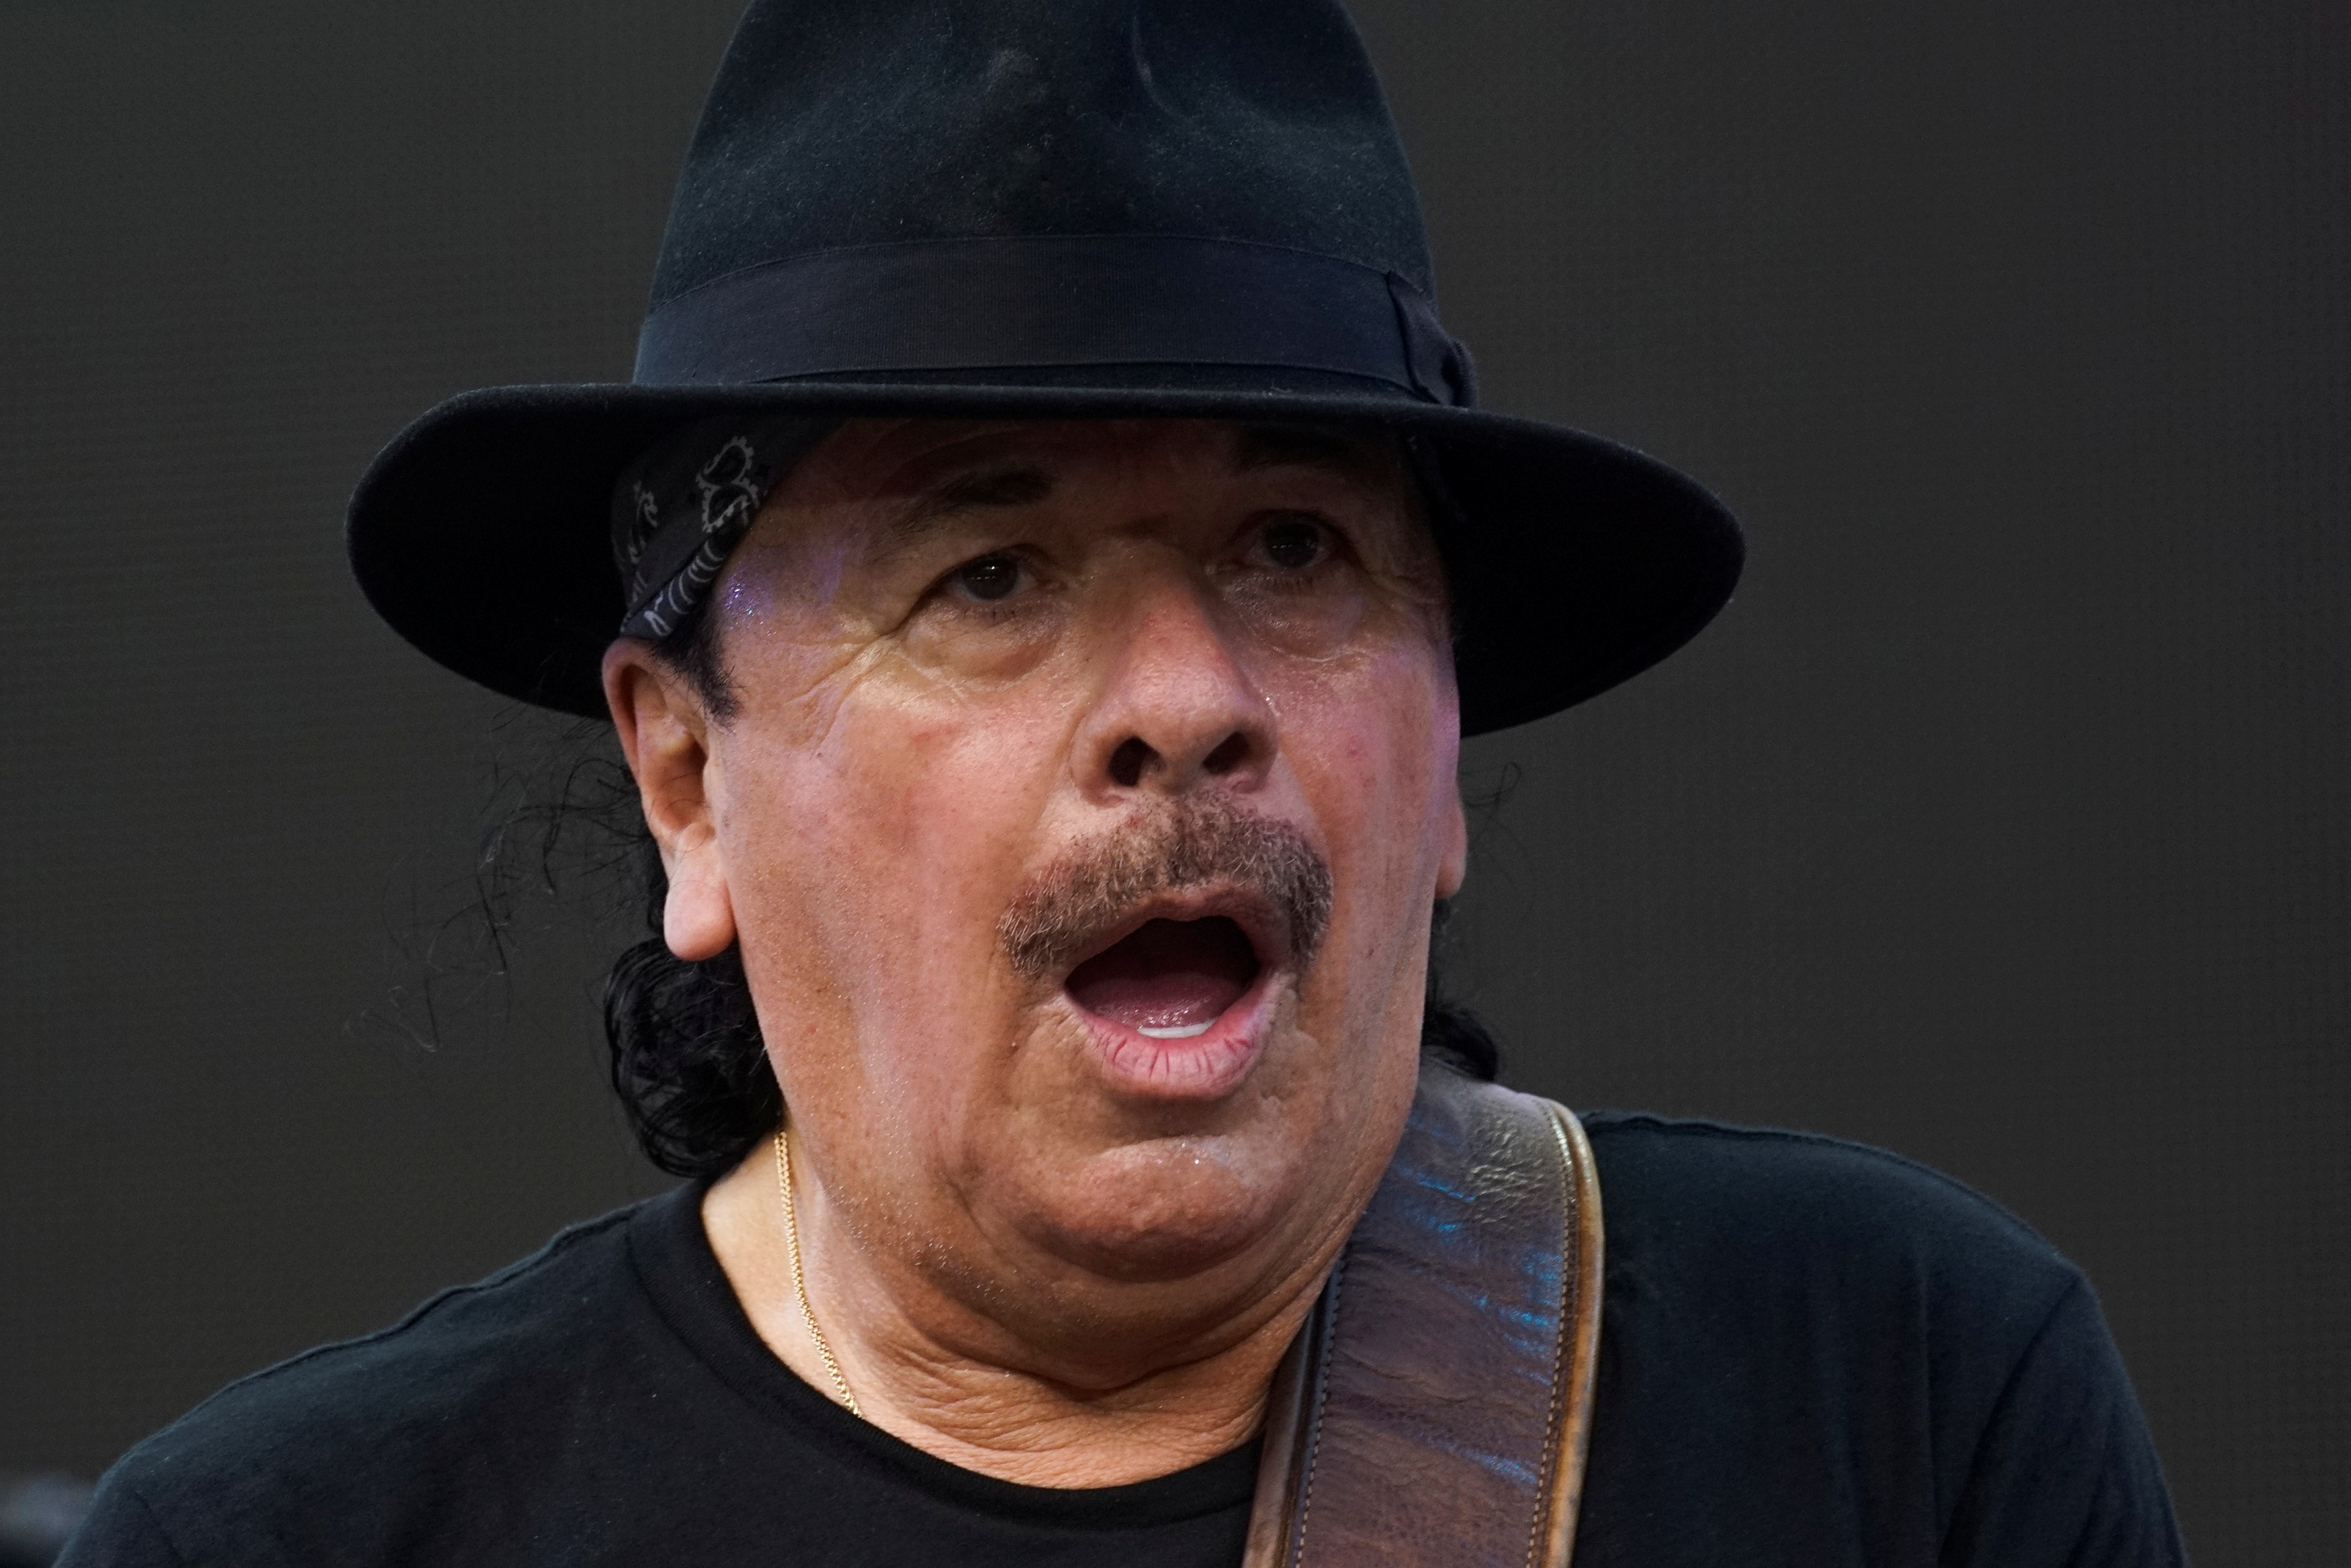 Carlos Santana suffered heat stroke midway through the concert and was replaced Photo: REUTERS/Eduardo Munoz